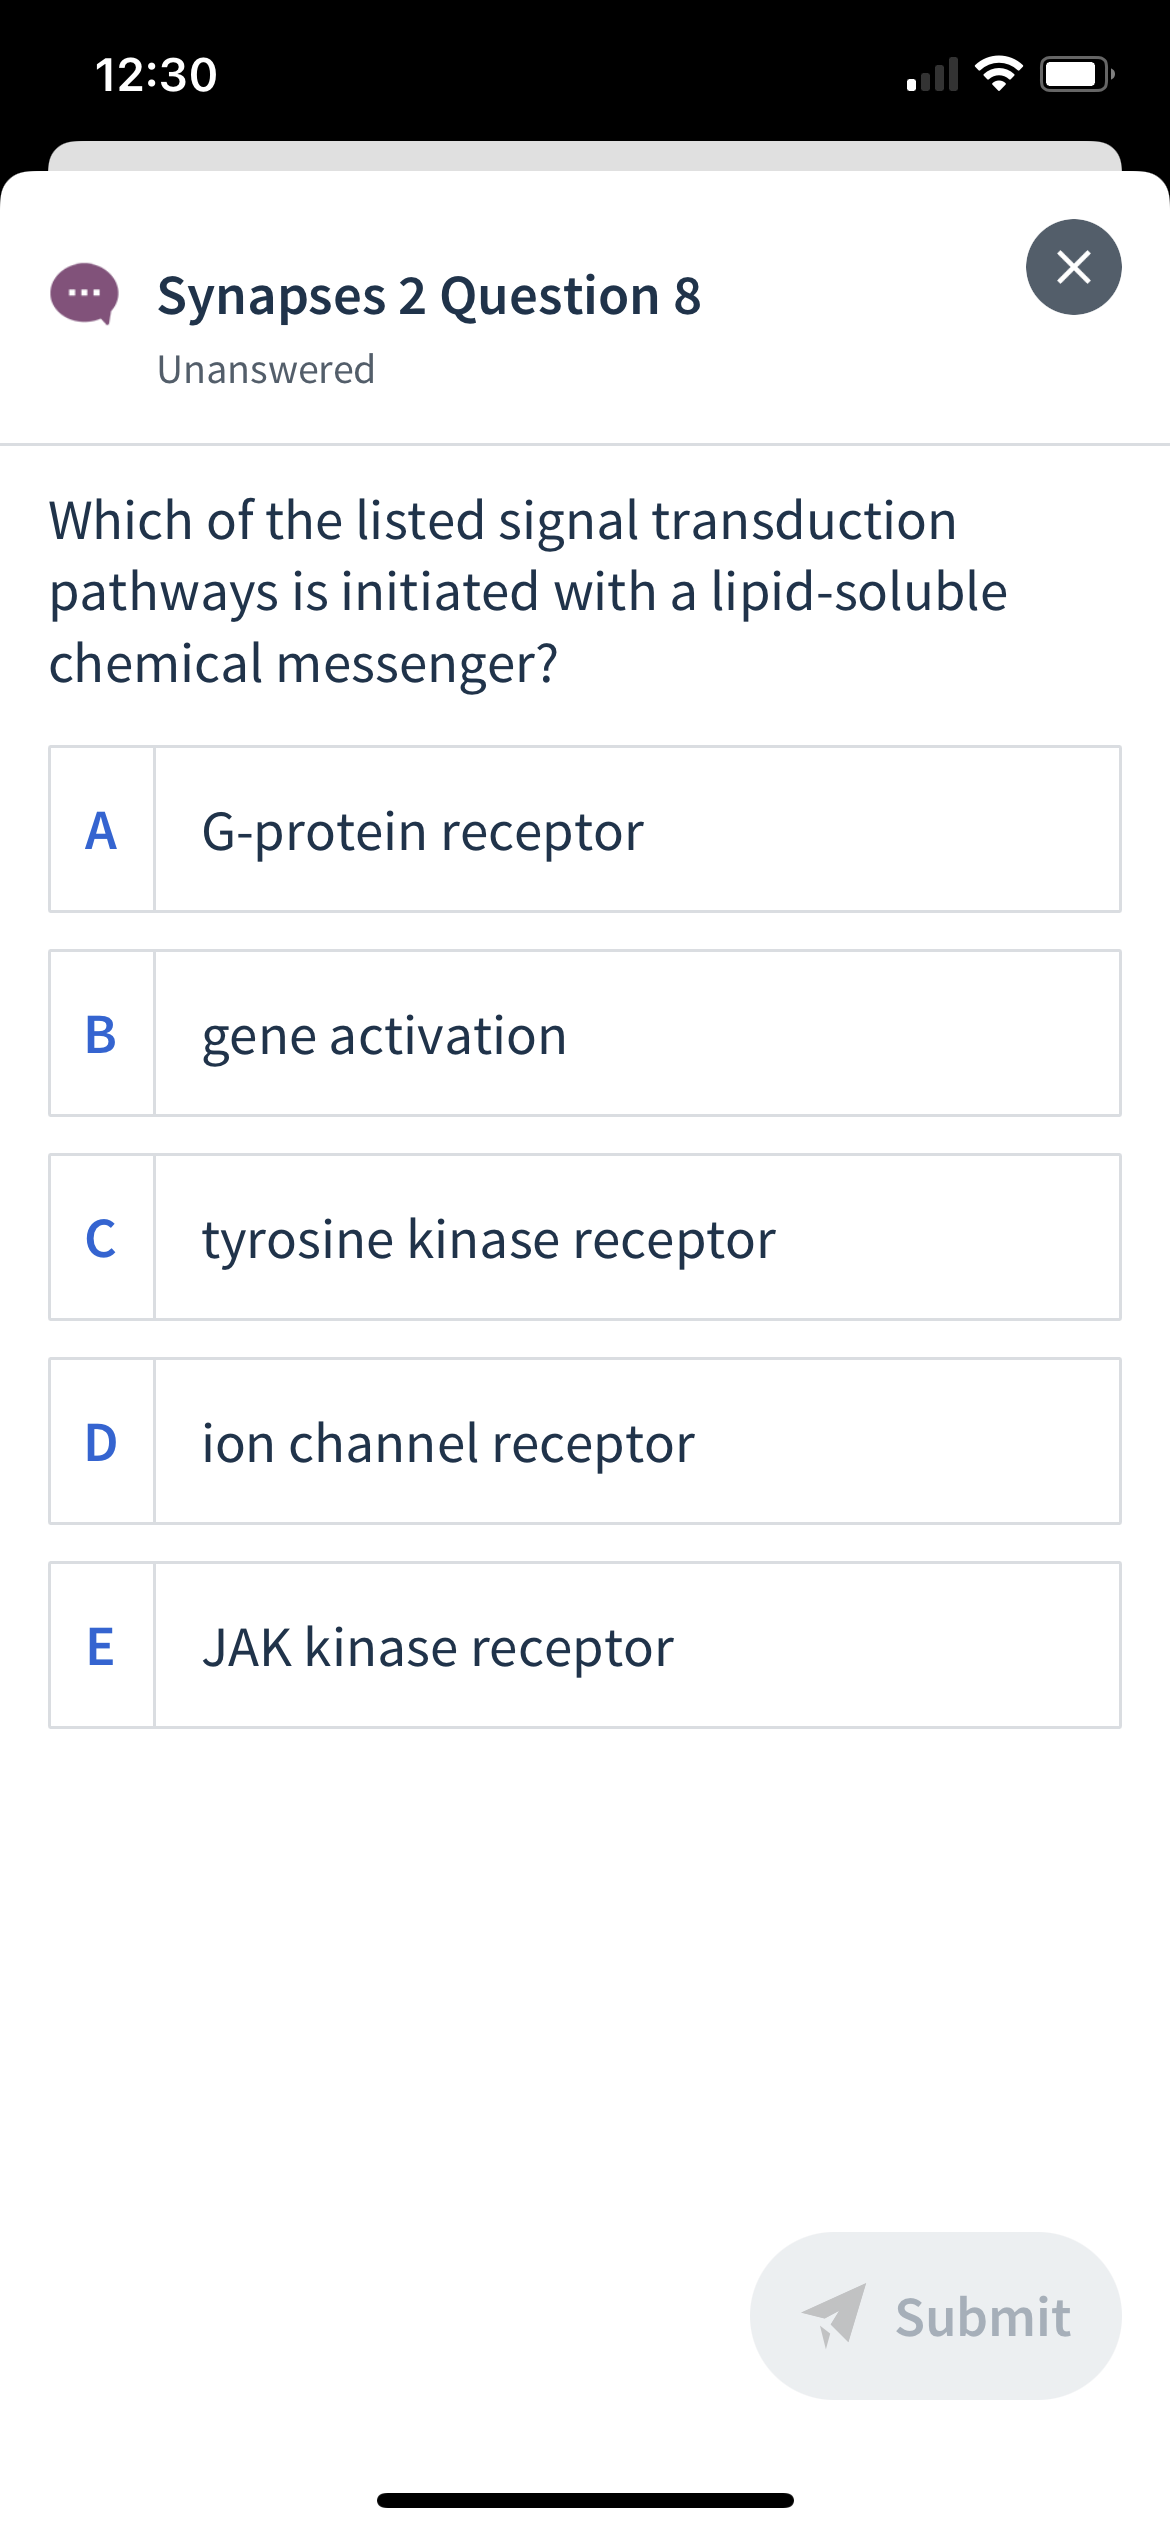 12:30
Synapses 2 Question 8
Unanswered
Which of the listed signal transduction
pathways is initiated with a lipid-soluble
chemical messenger?
A
G-protein receptor
gene activation
C
tyrosine kinase receptor
D
ion channel receptor
E
JAK kinase receptor
A Submit
B
